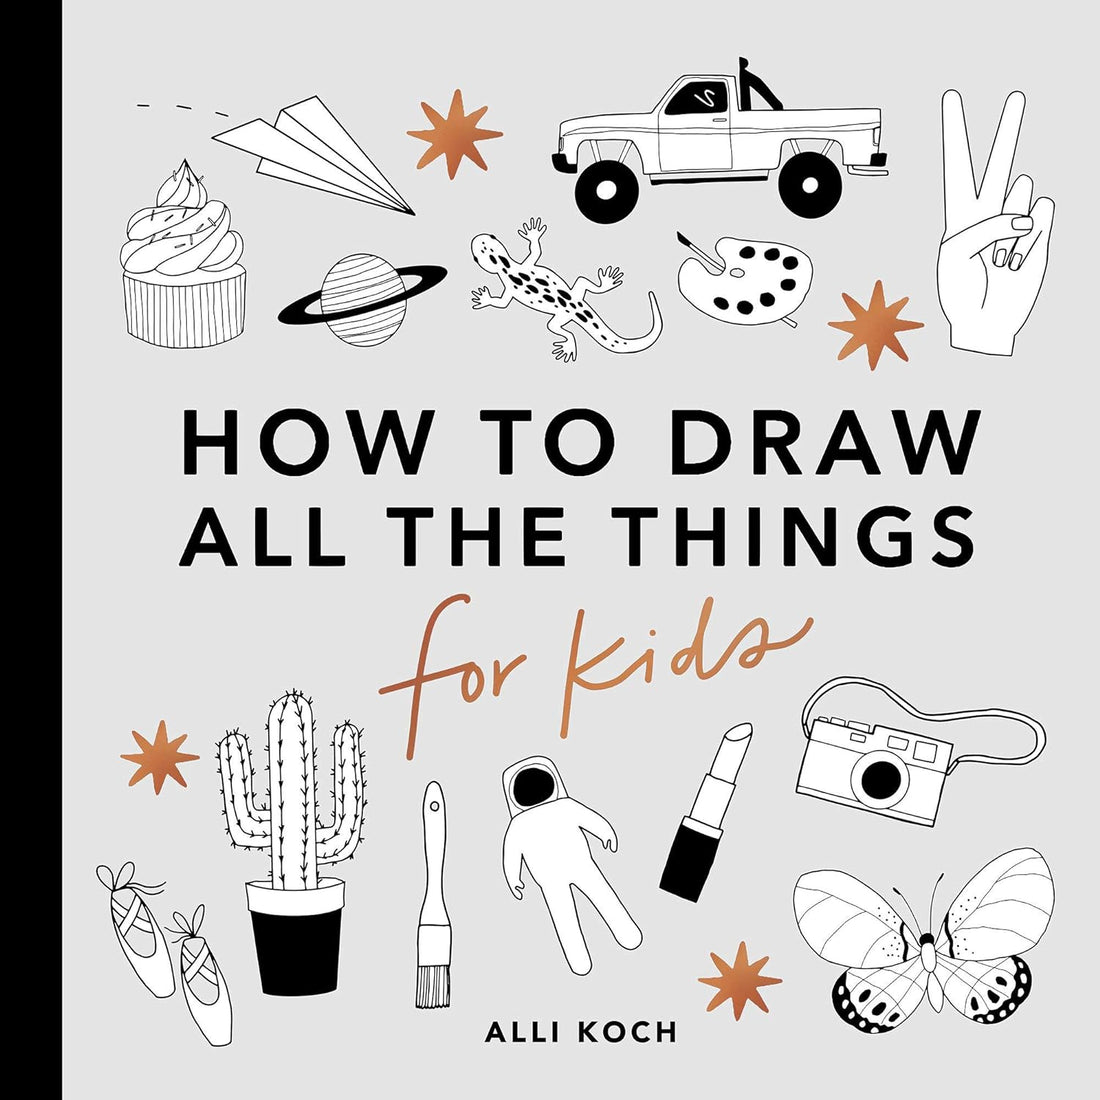 How To Draw All The Things - Parkette.